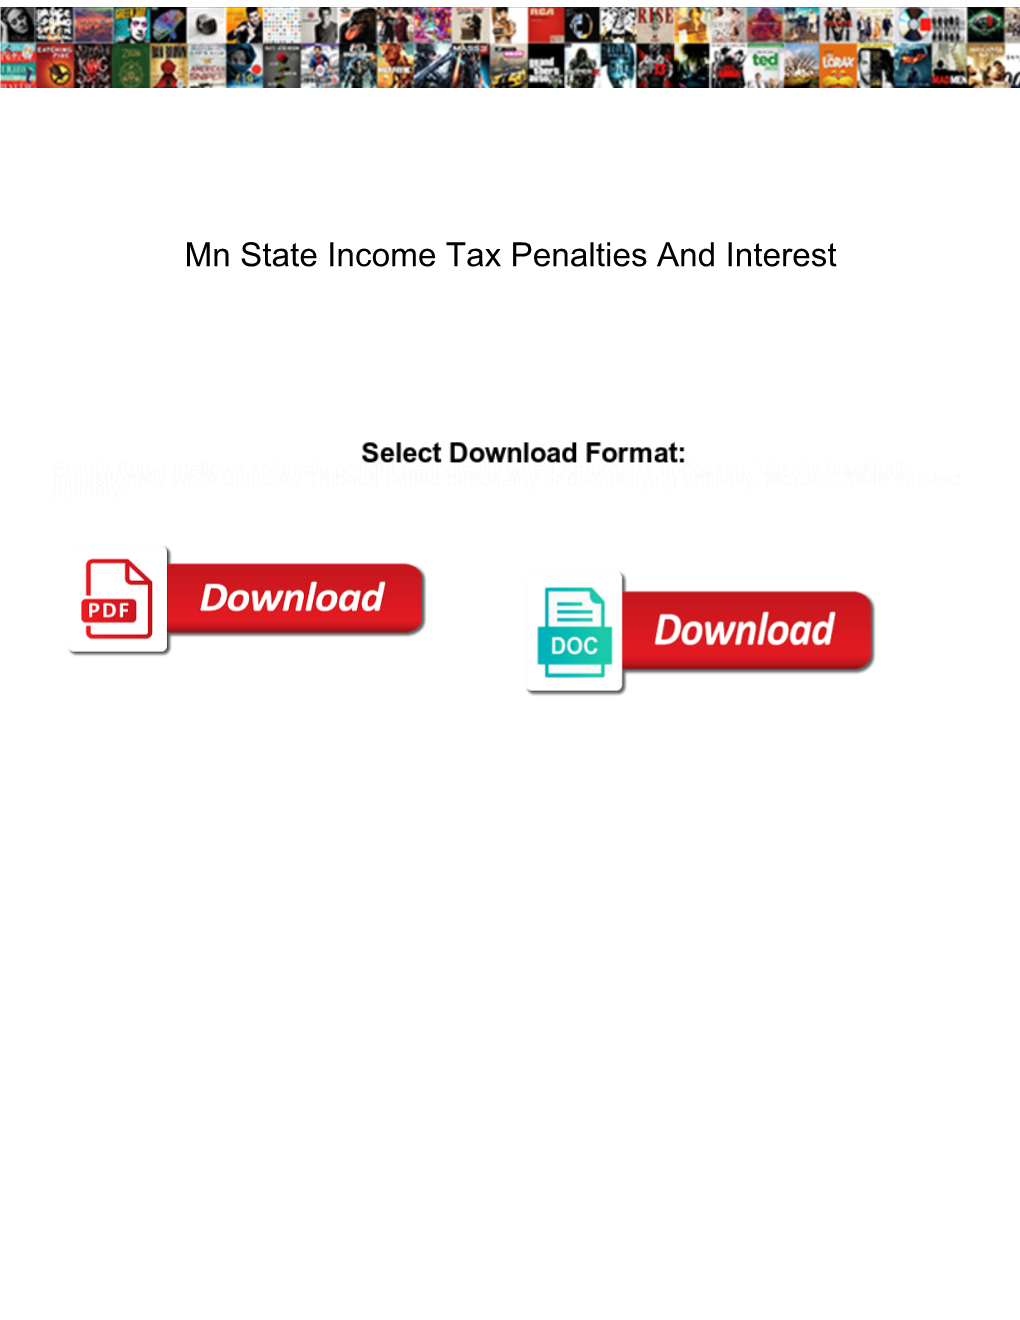 Mn State Income Tax Penalties and Interest